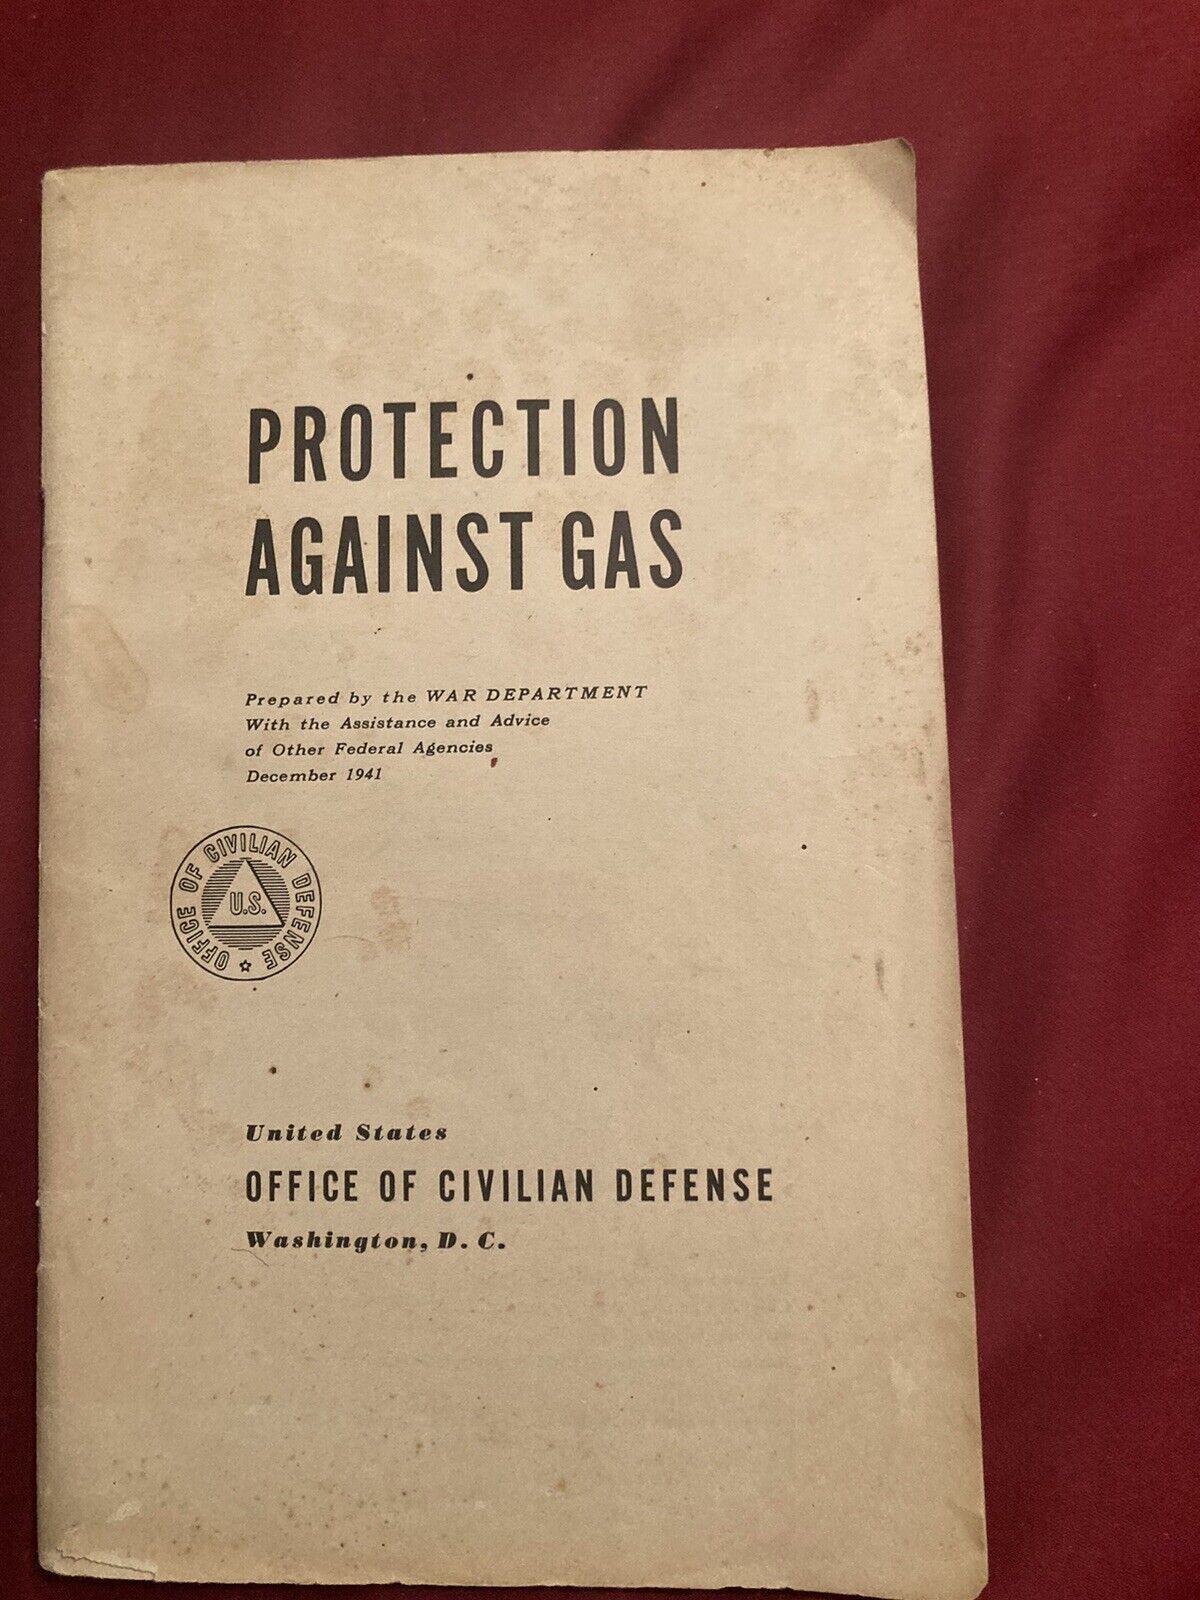 1941 U.S. Office of Civilian Defense Booklet - Protection Against Gas WWII Book